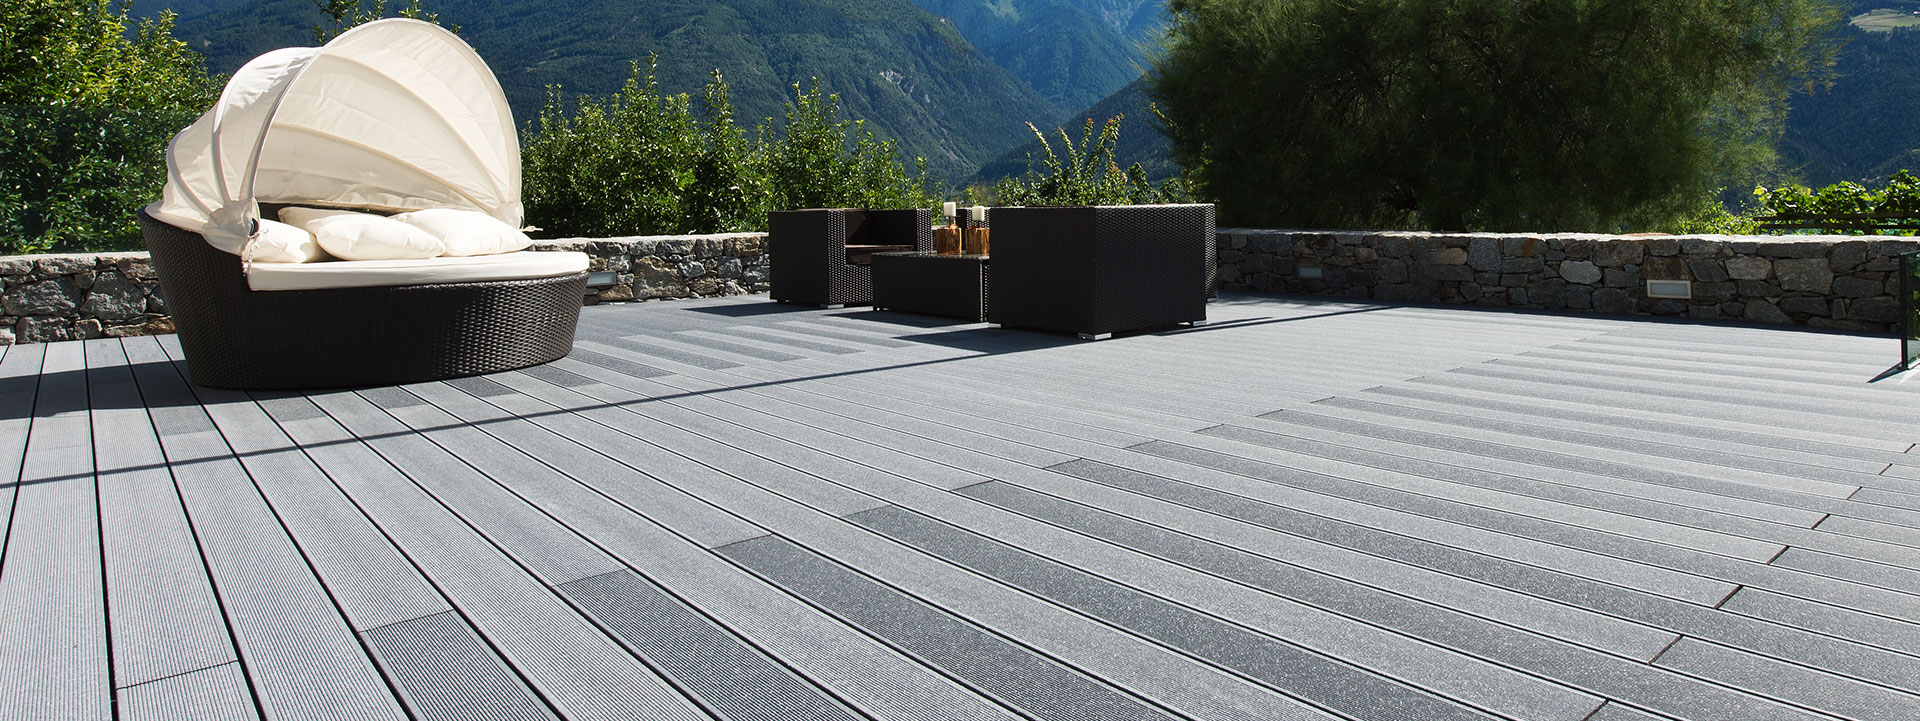 Composite Decking In Ireland High Quality Composite Decking Boards intended for sizing 1920 X 721